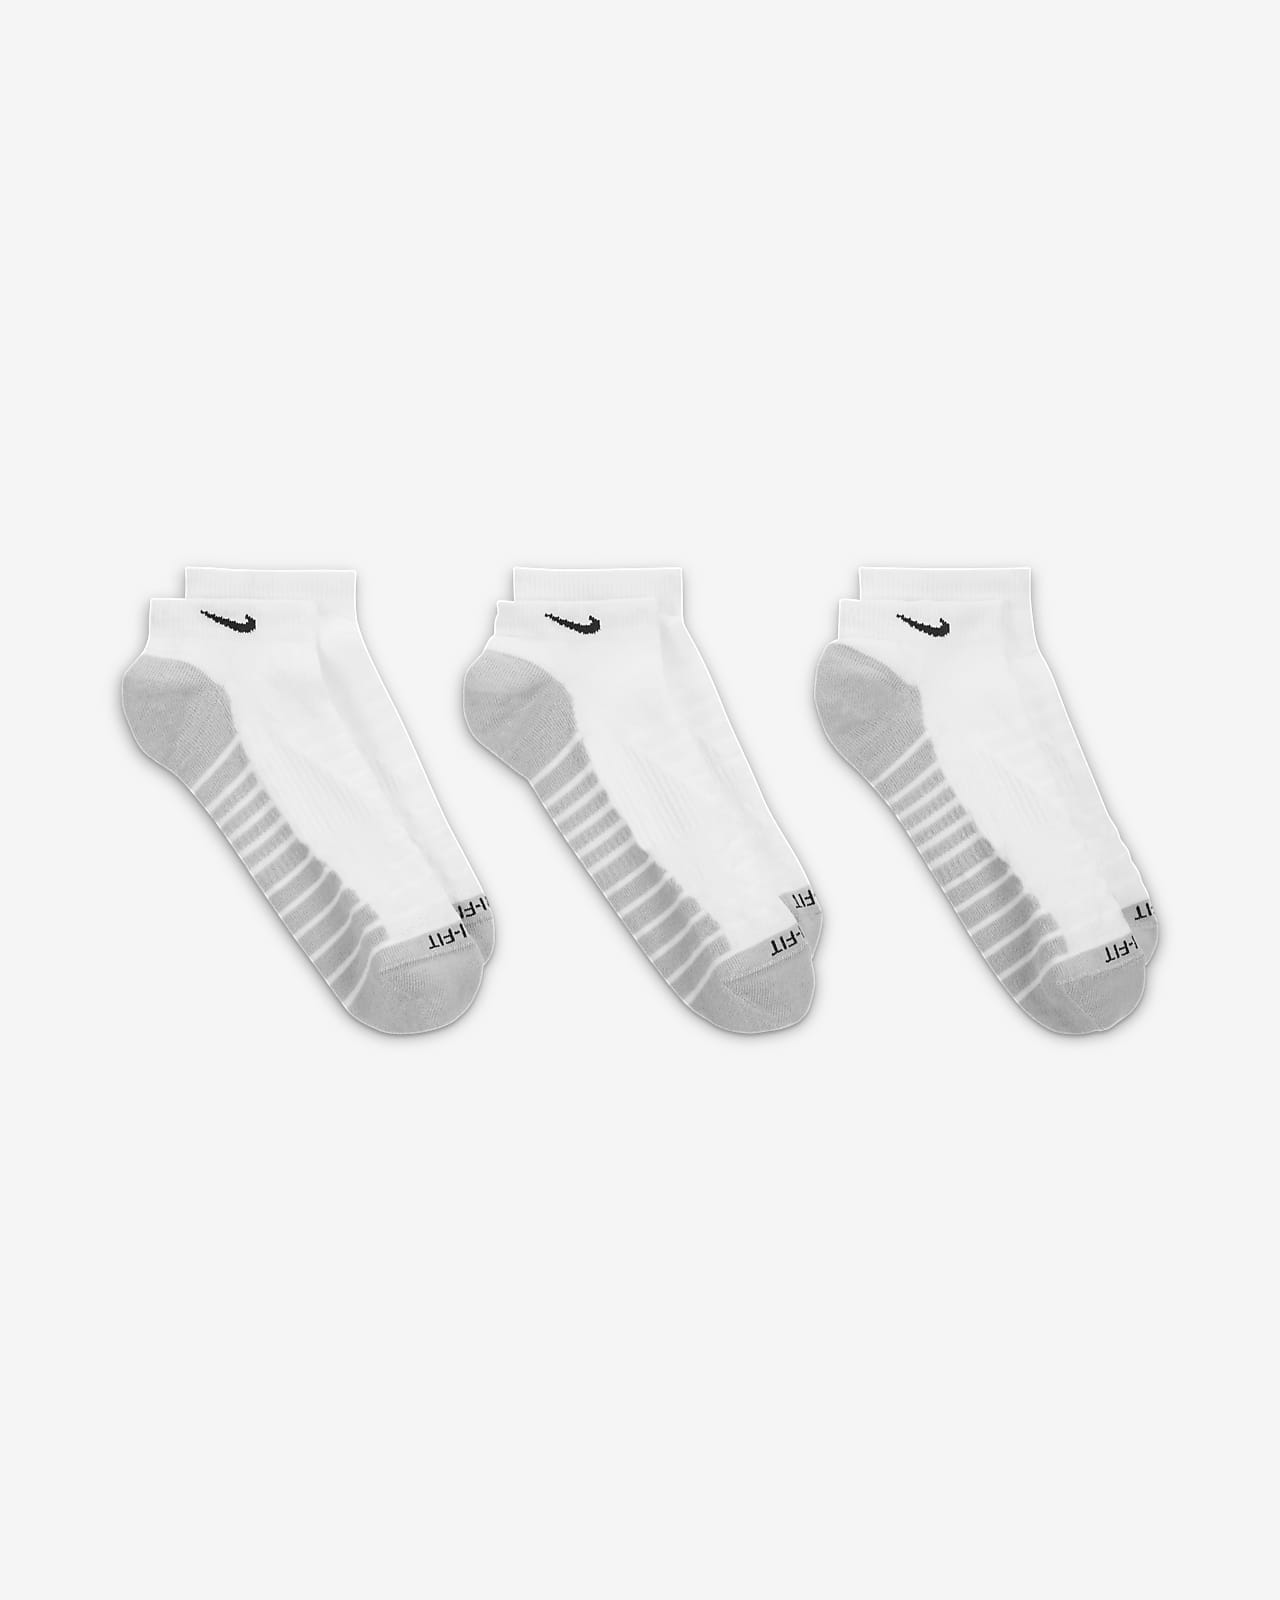 3 Paires de Chaussettes Nike Everyday Max Cushioned Blanc